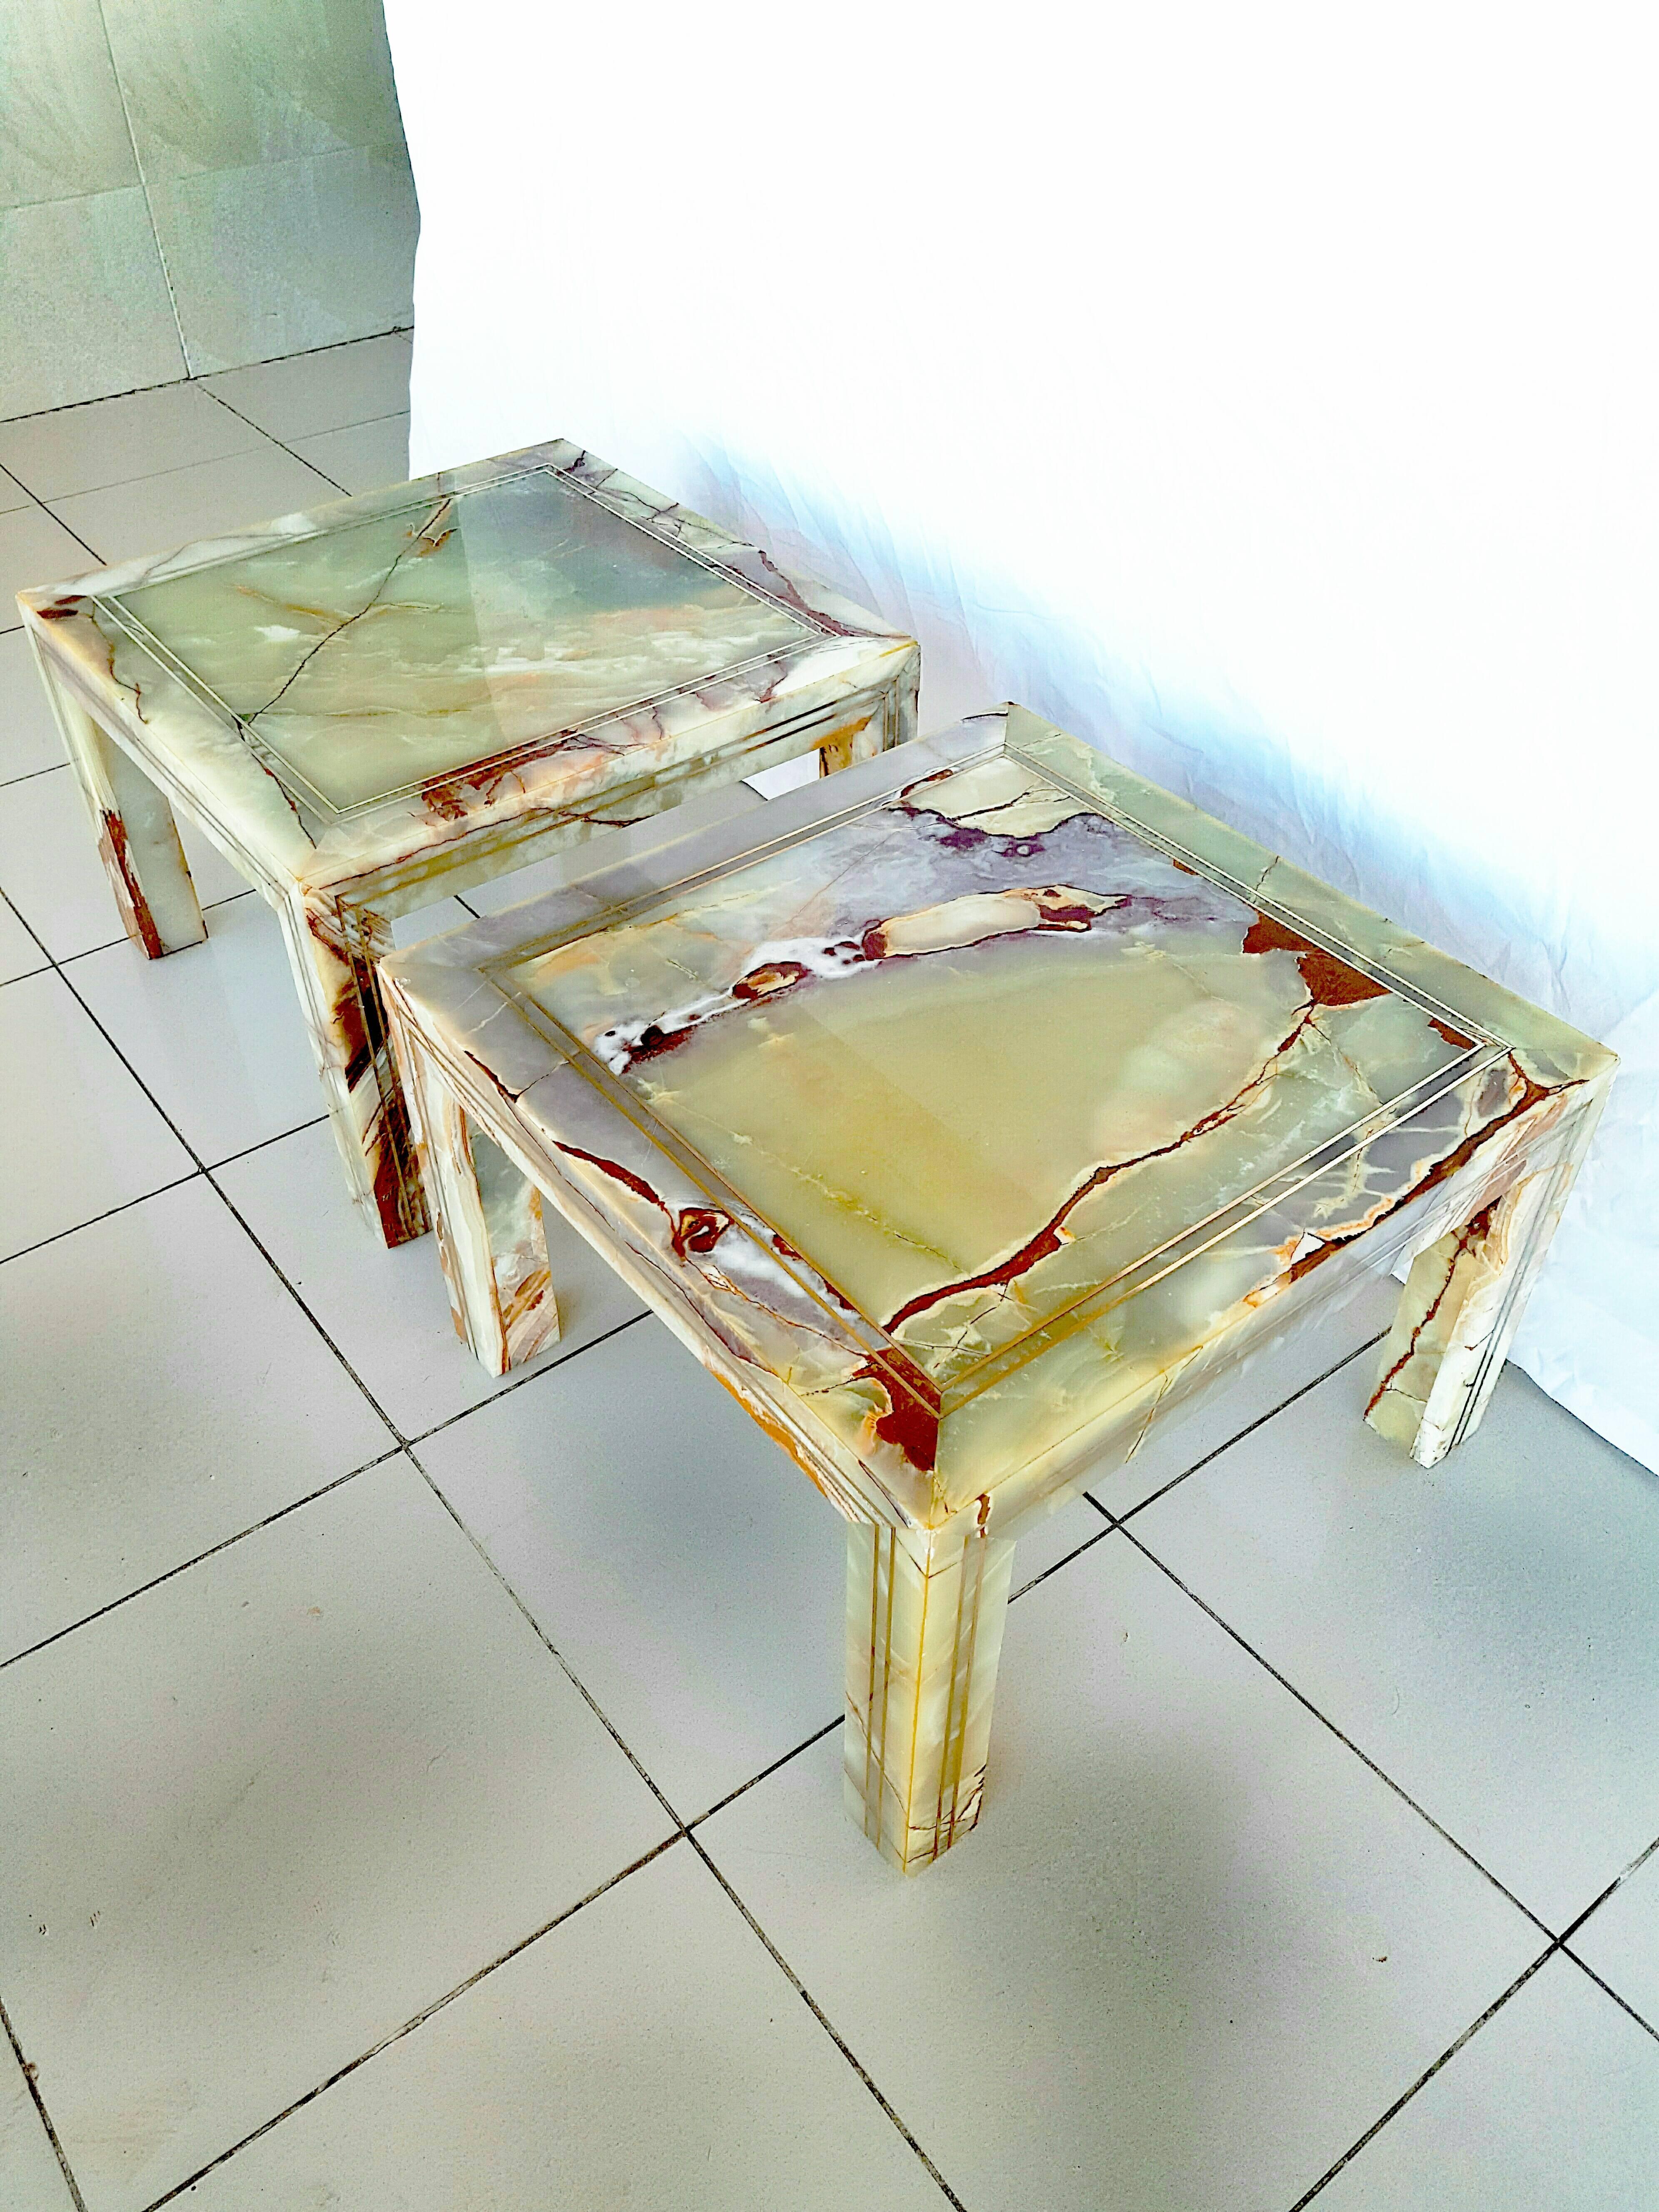 Manifique pair of end table entirely in marble with brass inserts.
Origin Italy, circa 1970.
Very heavy and in excellent vintage condition.